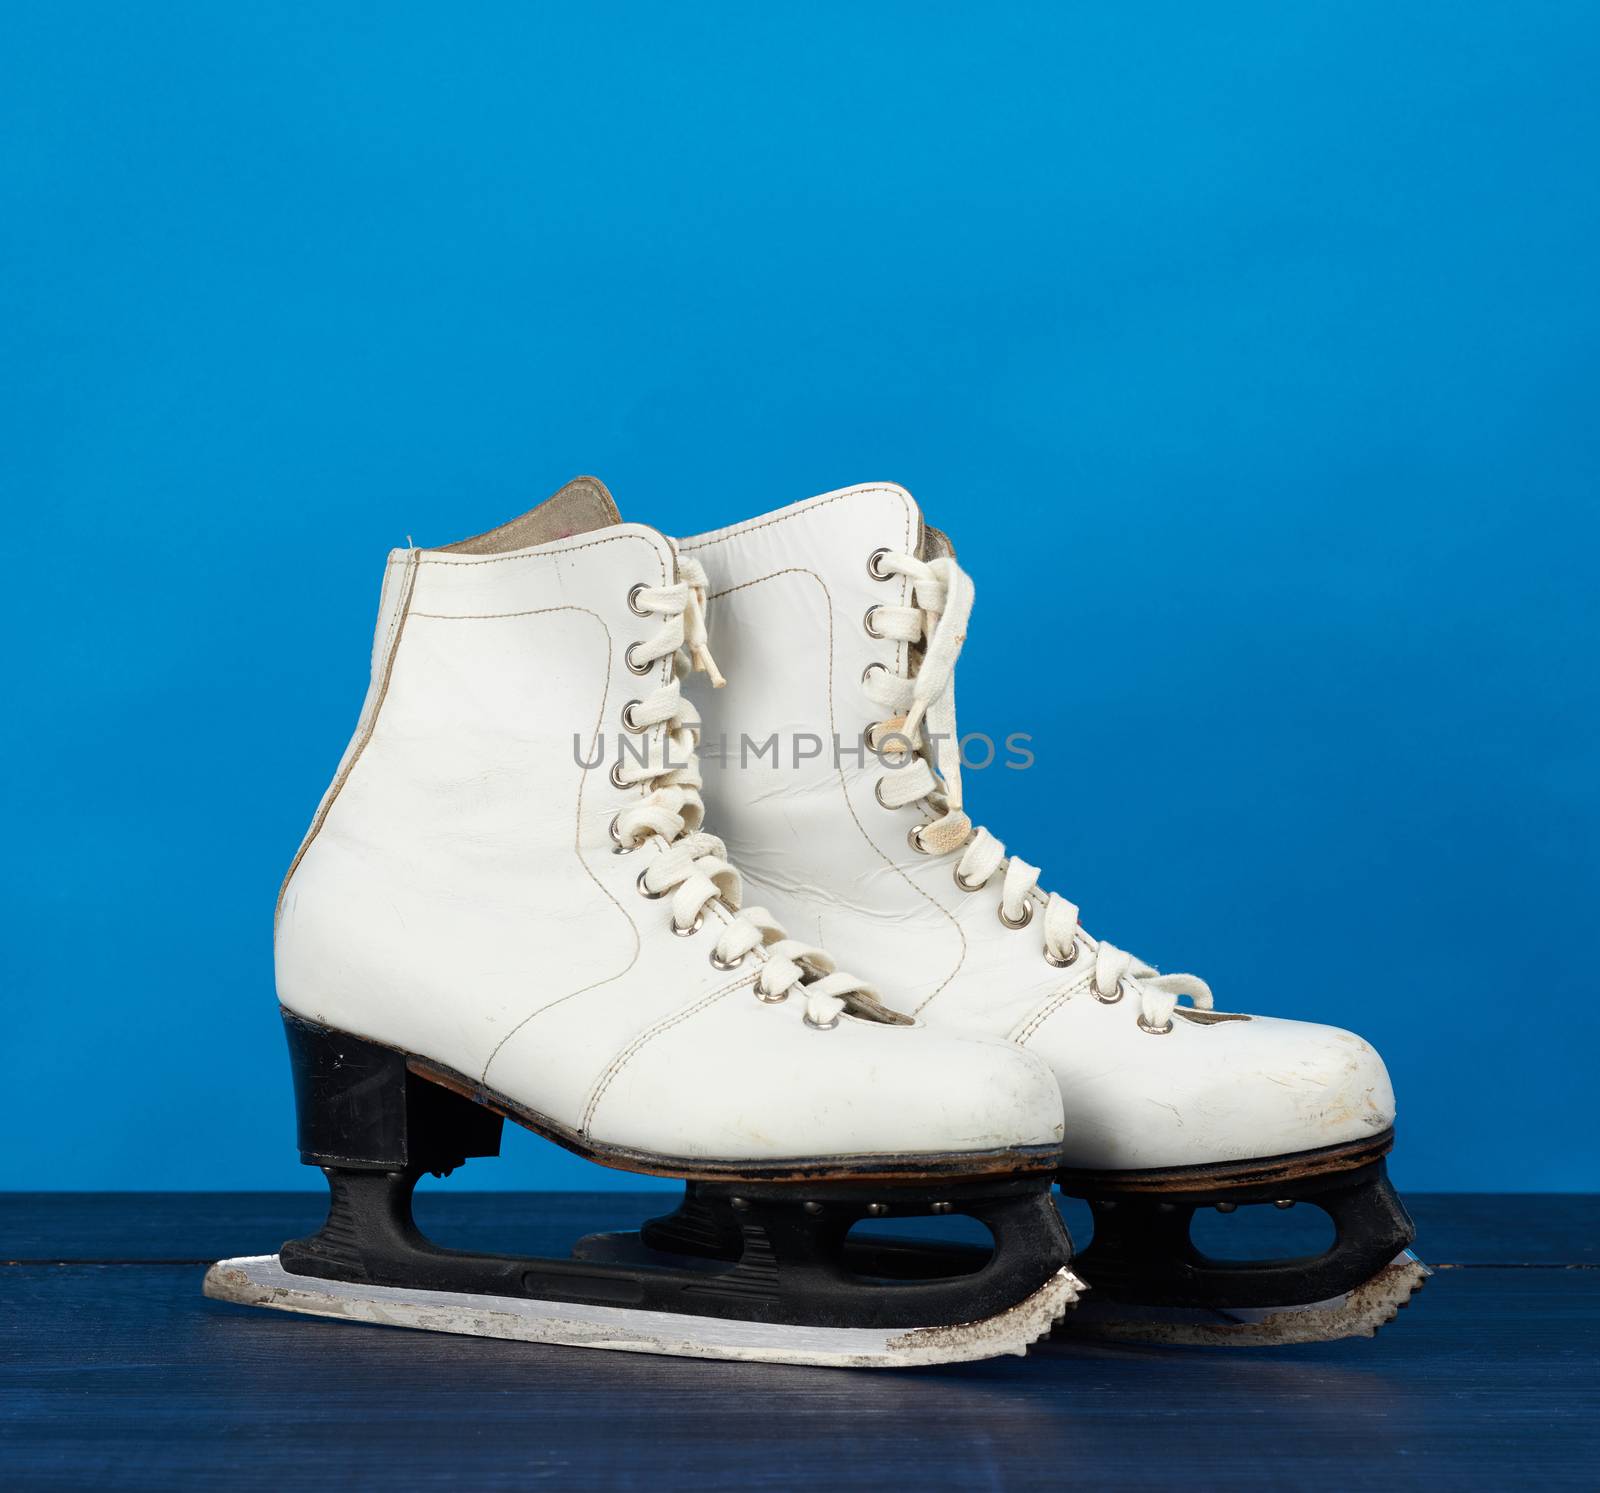 white leather skates for figure skating stand on a blue wooden background, sports equipment, copy space